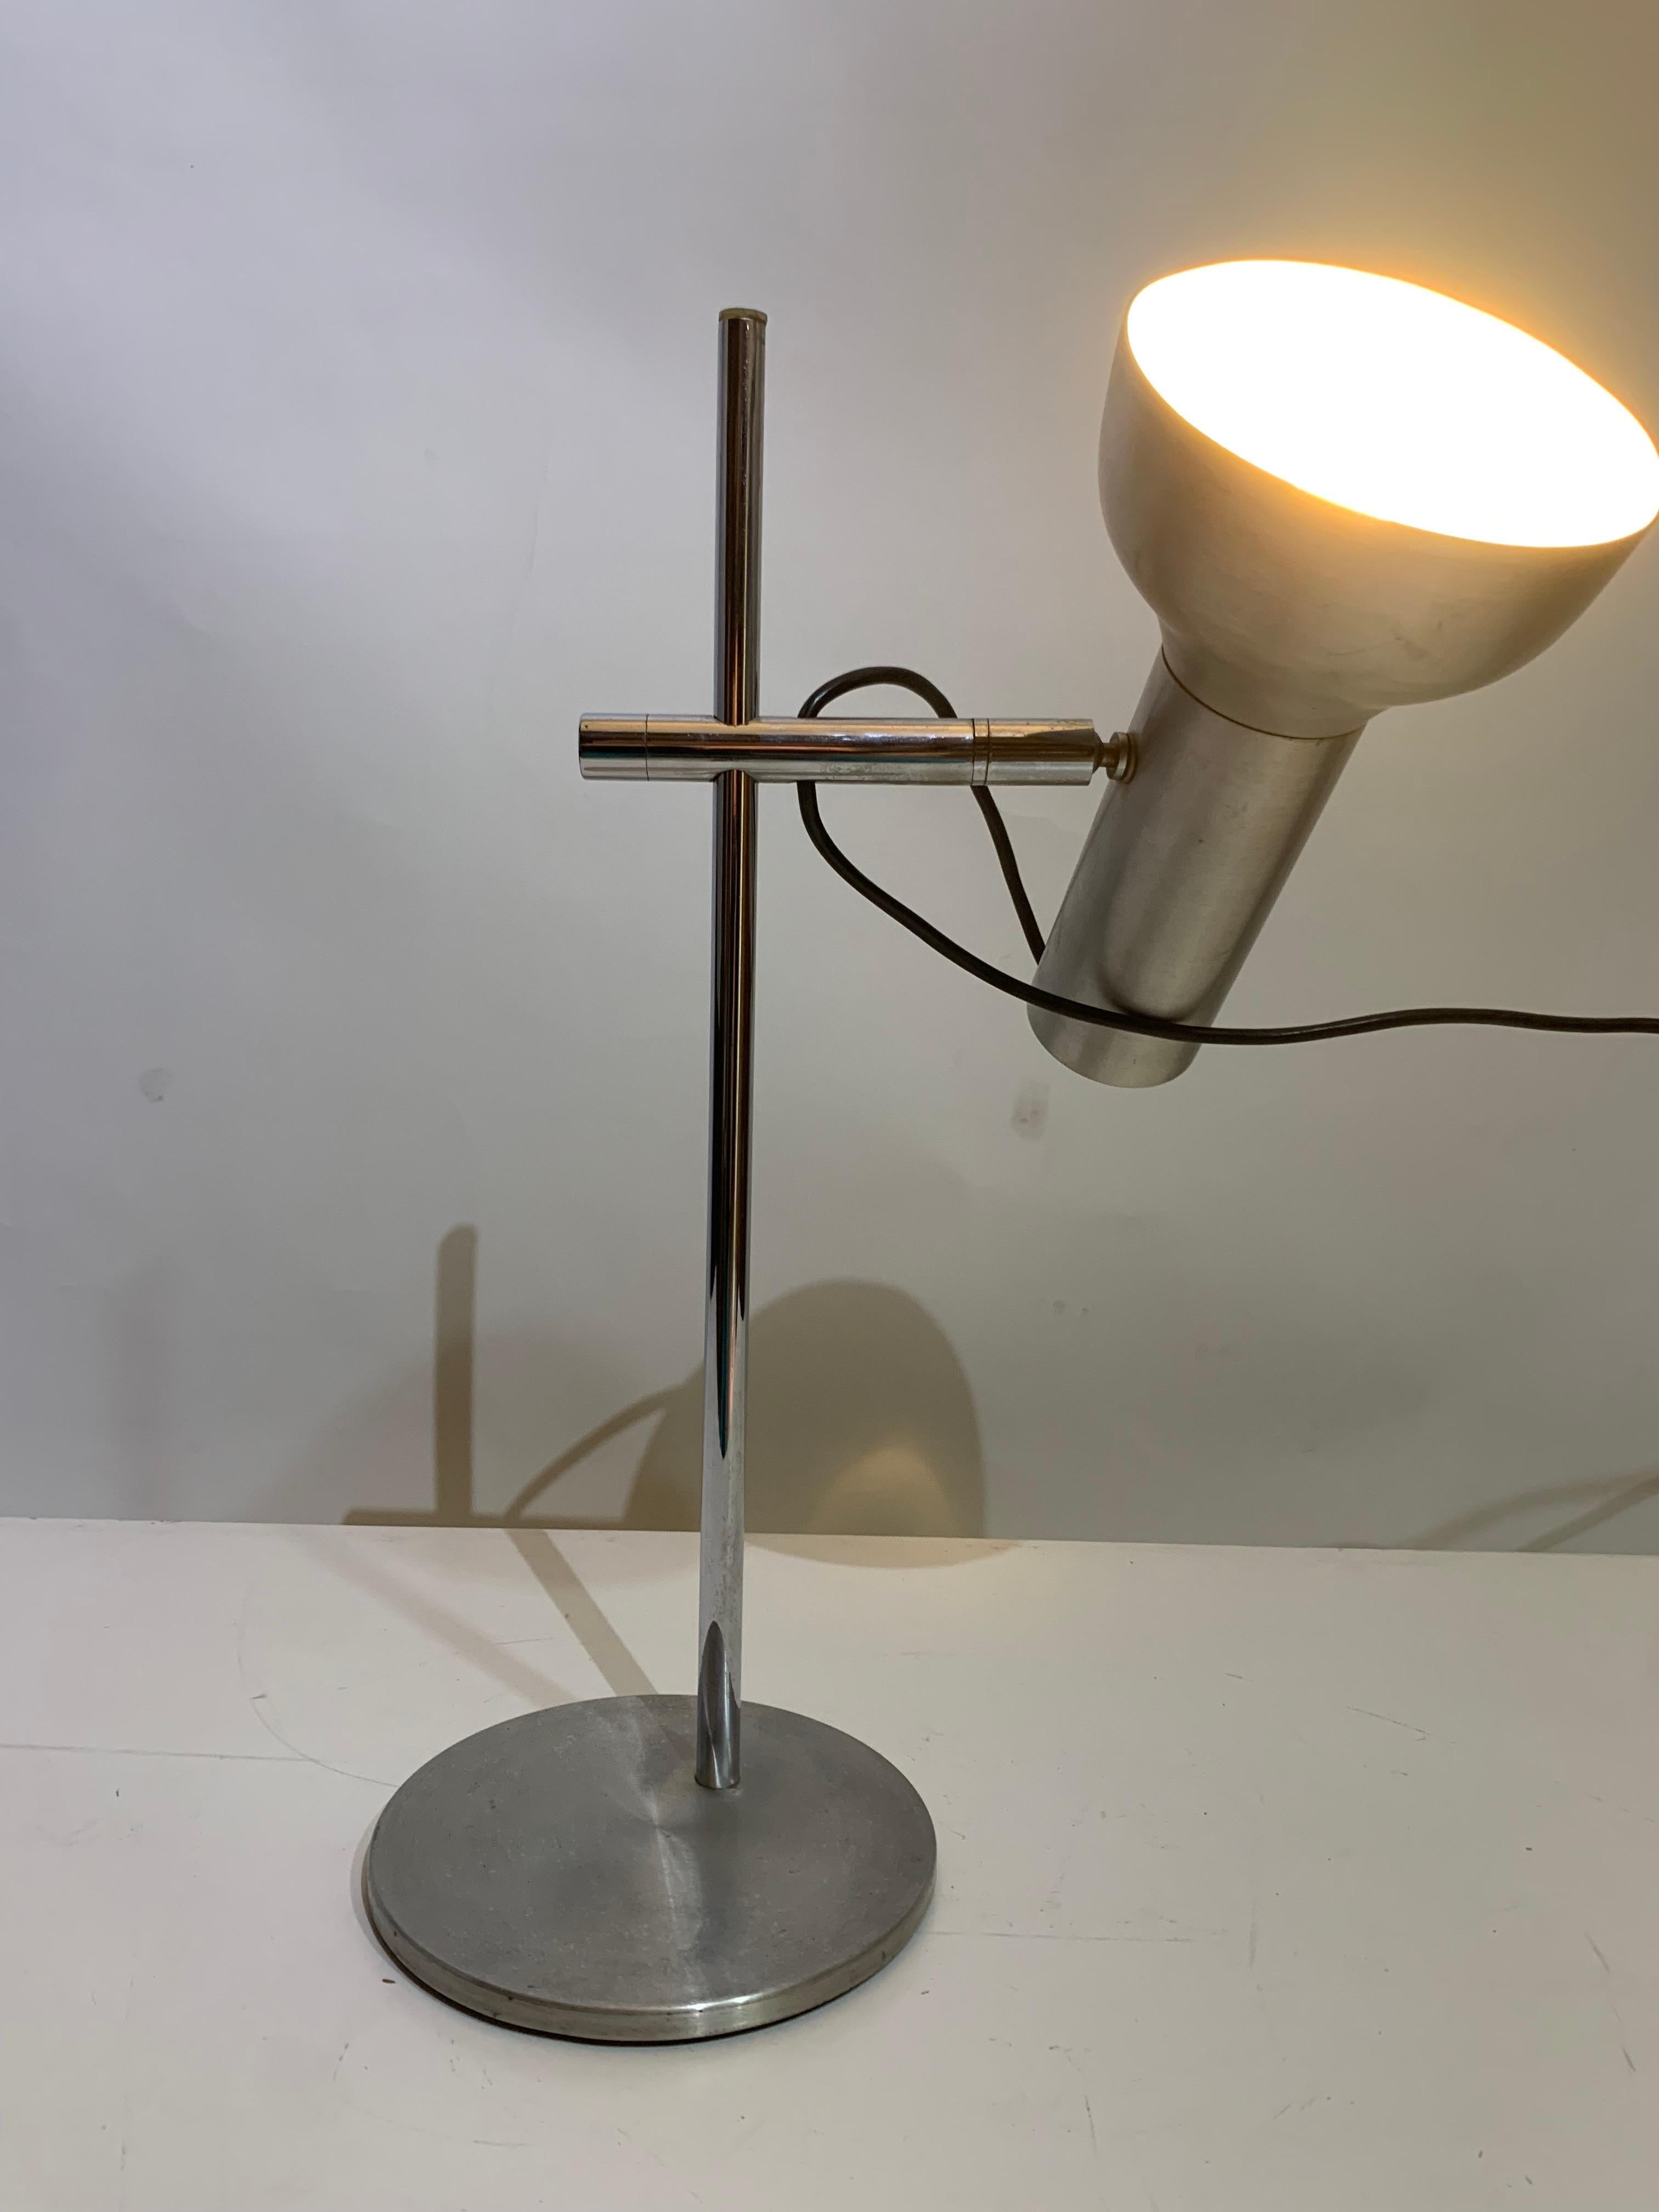 Desk lamp with adjustable height and all directions ( 360 degrees) tilt-able lampshade. Material is brushed and chrome-plated steel. The cantilevered metal is intersecting with the horizontal piece and is adjustable in height, allowing various